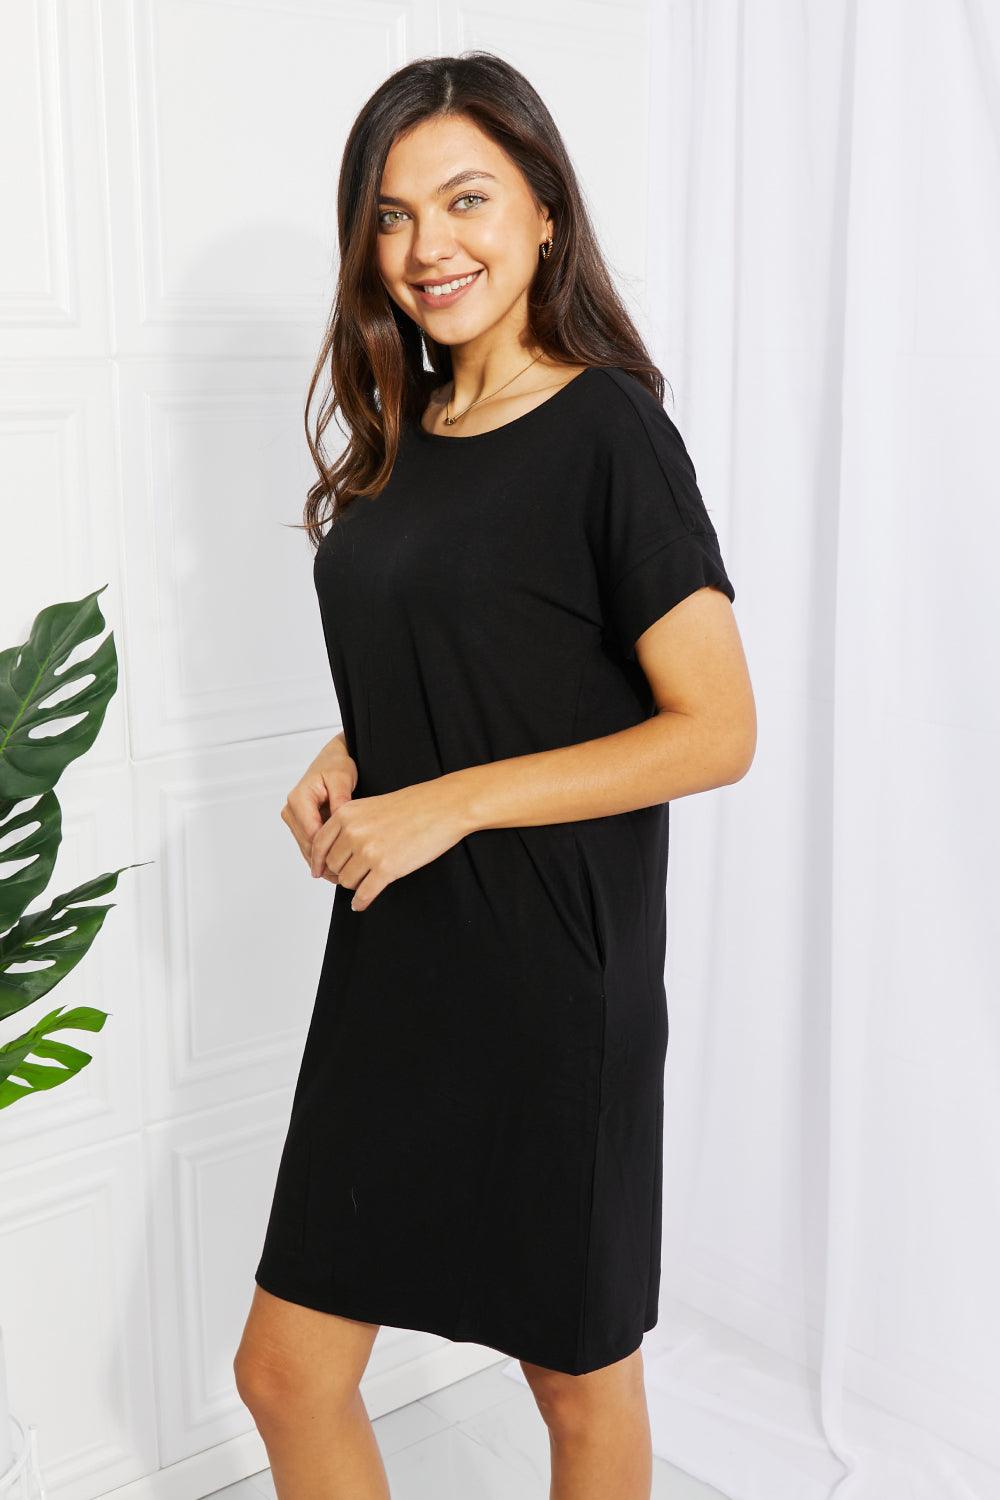 Zenana Chic in the City Full Size Rolled Short Sleeve Dress - Glamorous Boutique USA L.L.C.